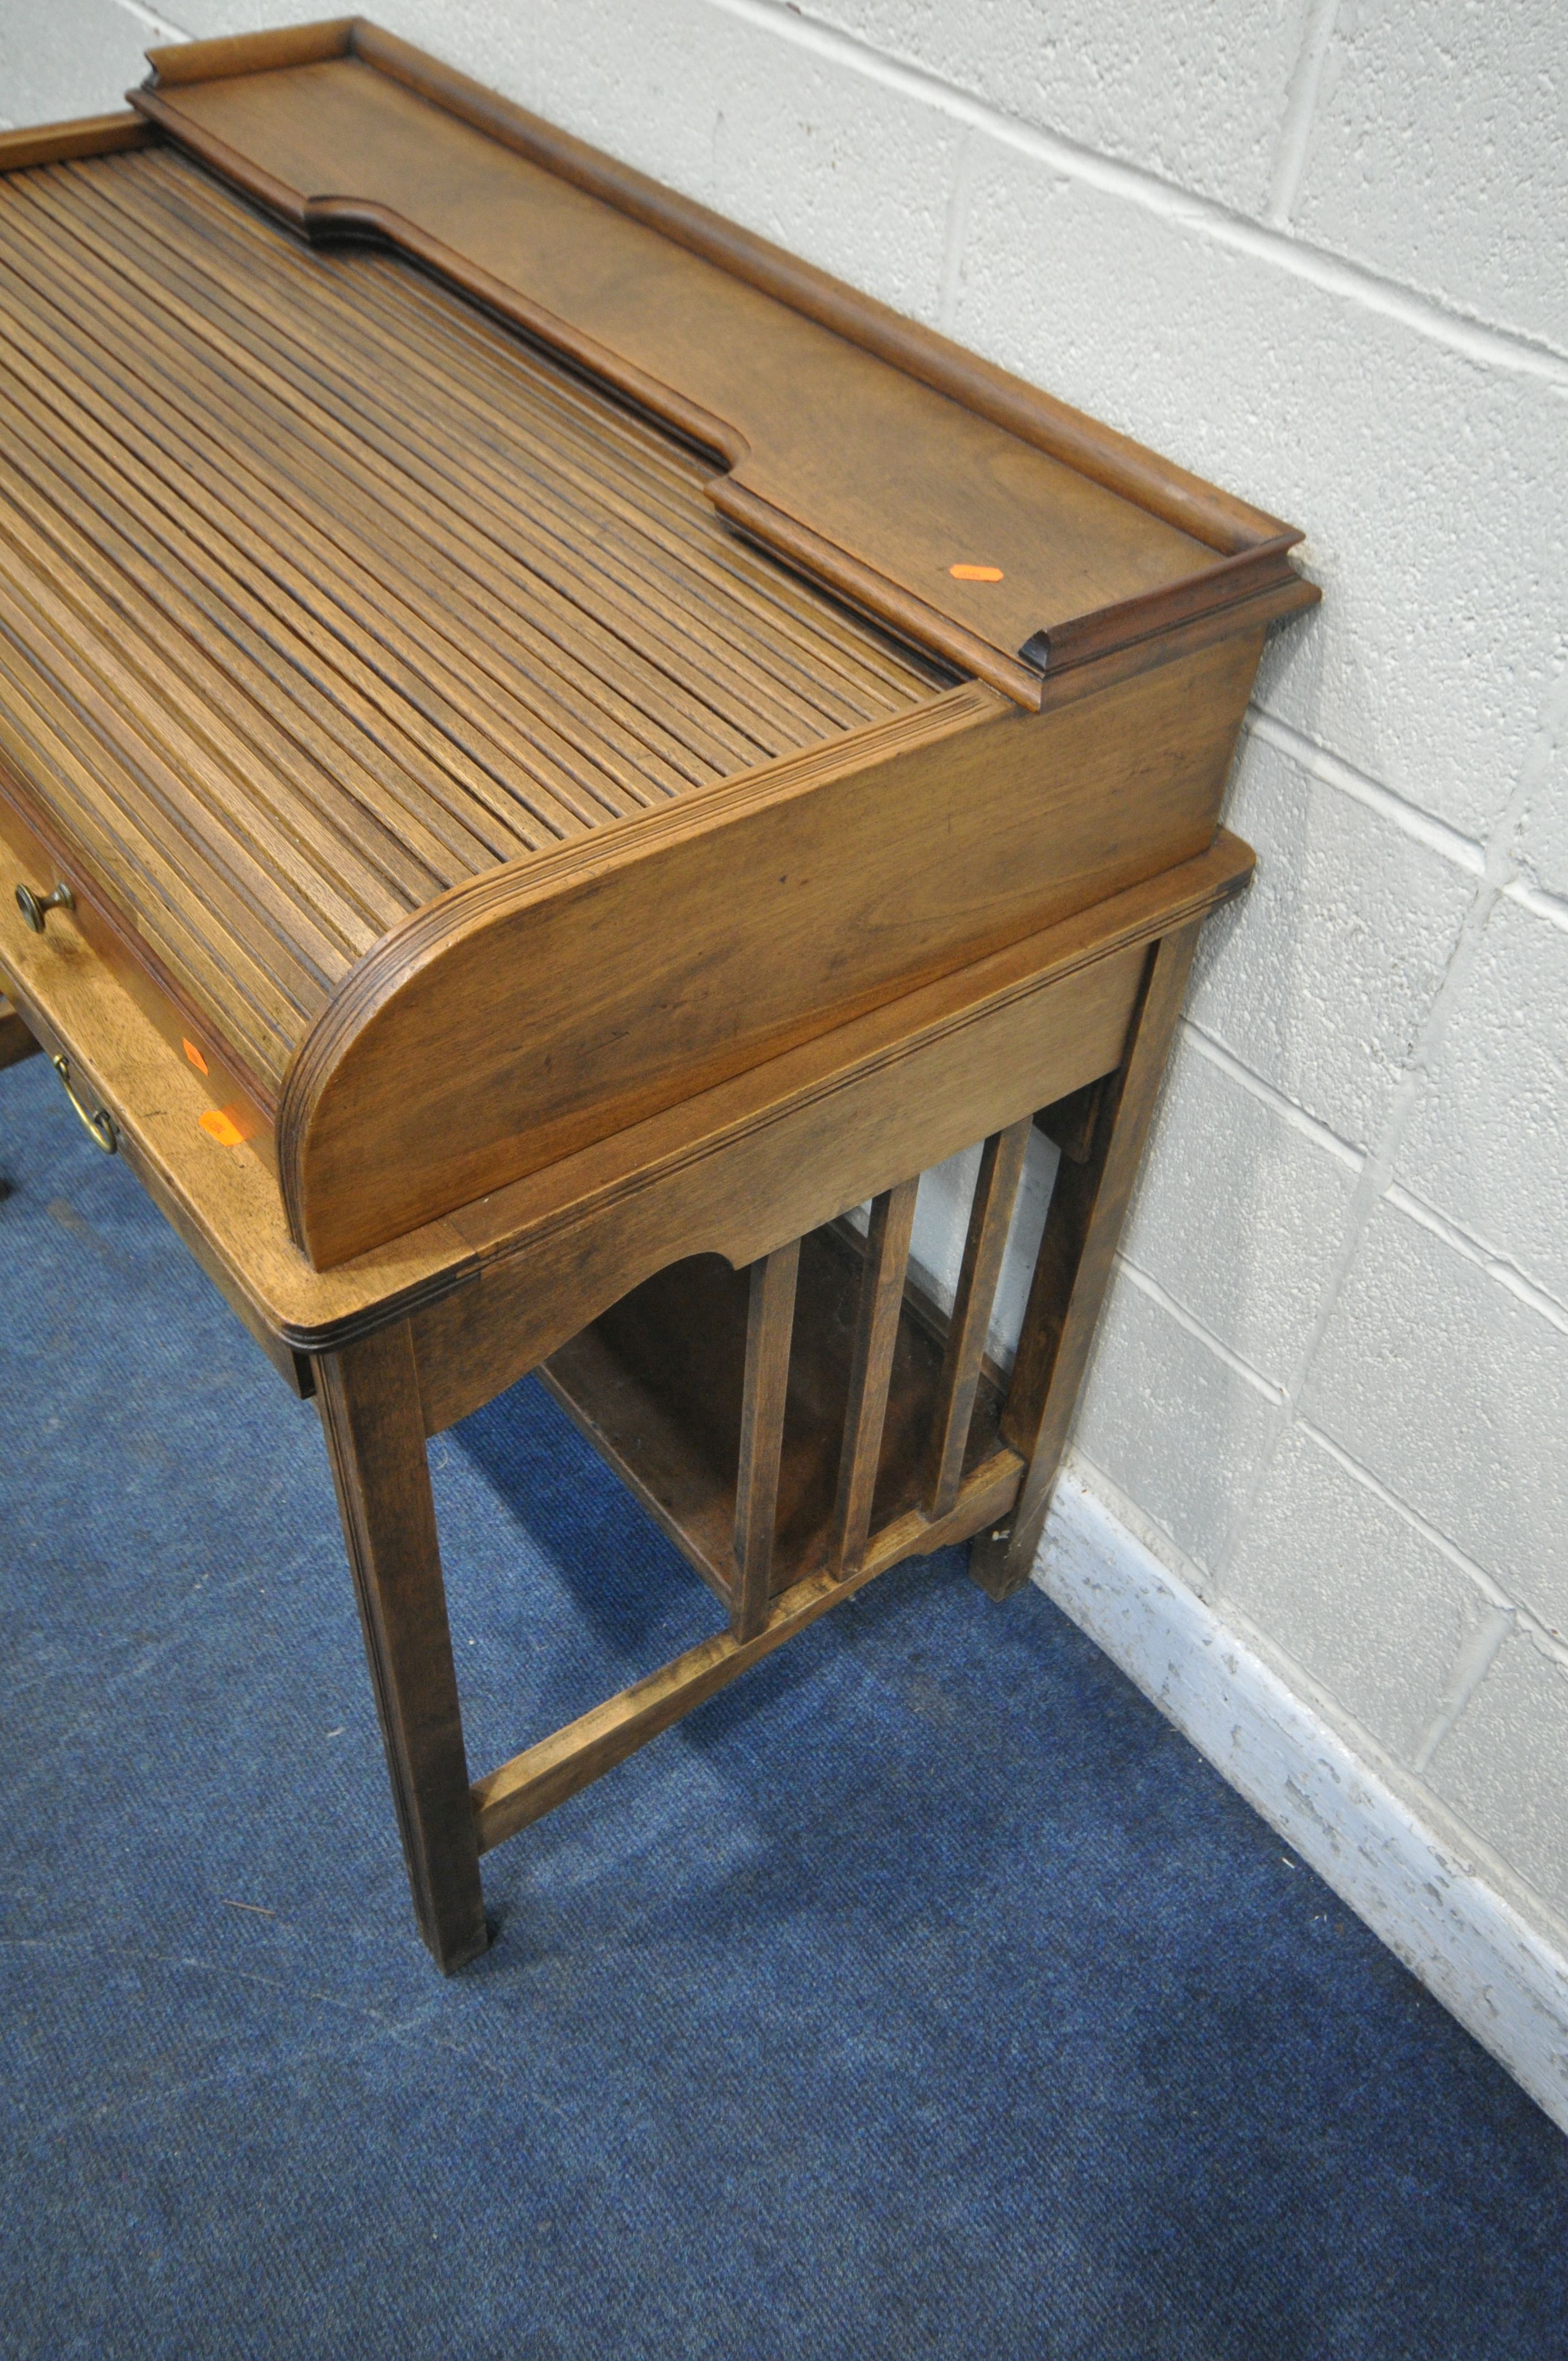 ANGUS OF LONDON, AN EARLY 20TH CENTURY WALNUT ROLL TOP DESK, with a raised shelf, the tambour door - Image 3 of 7